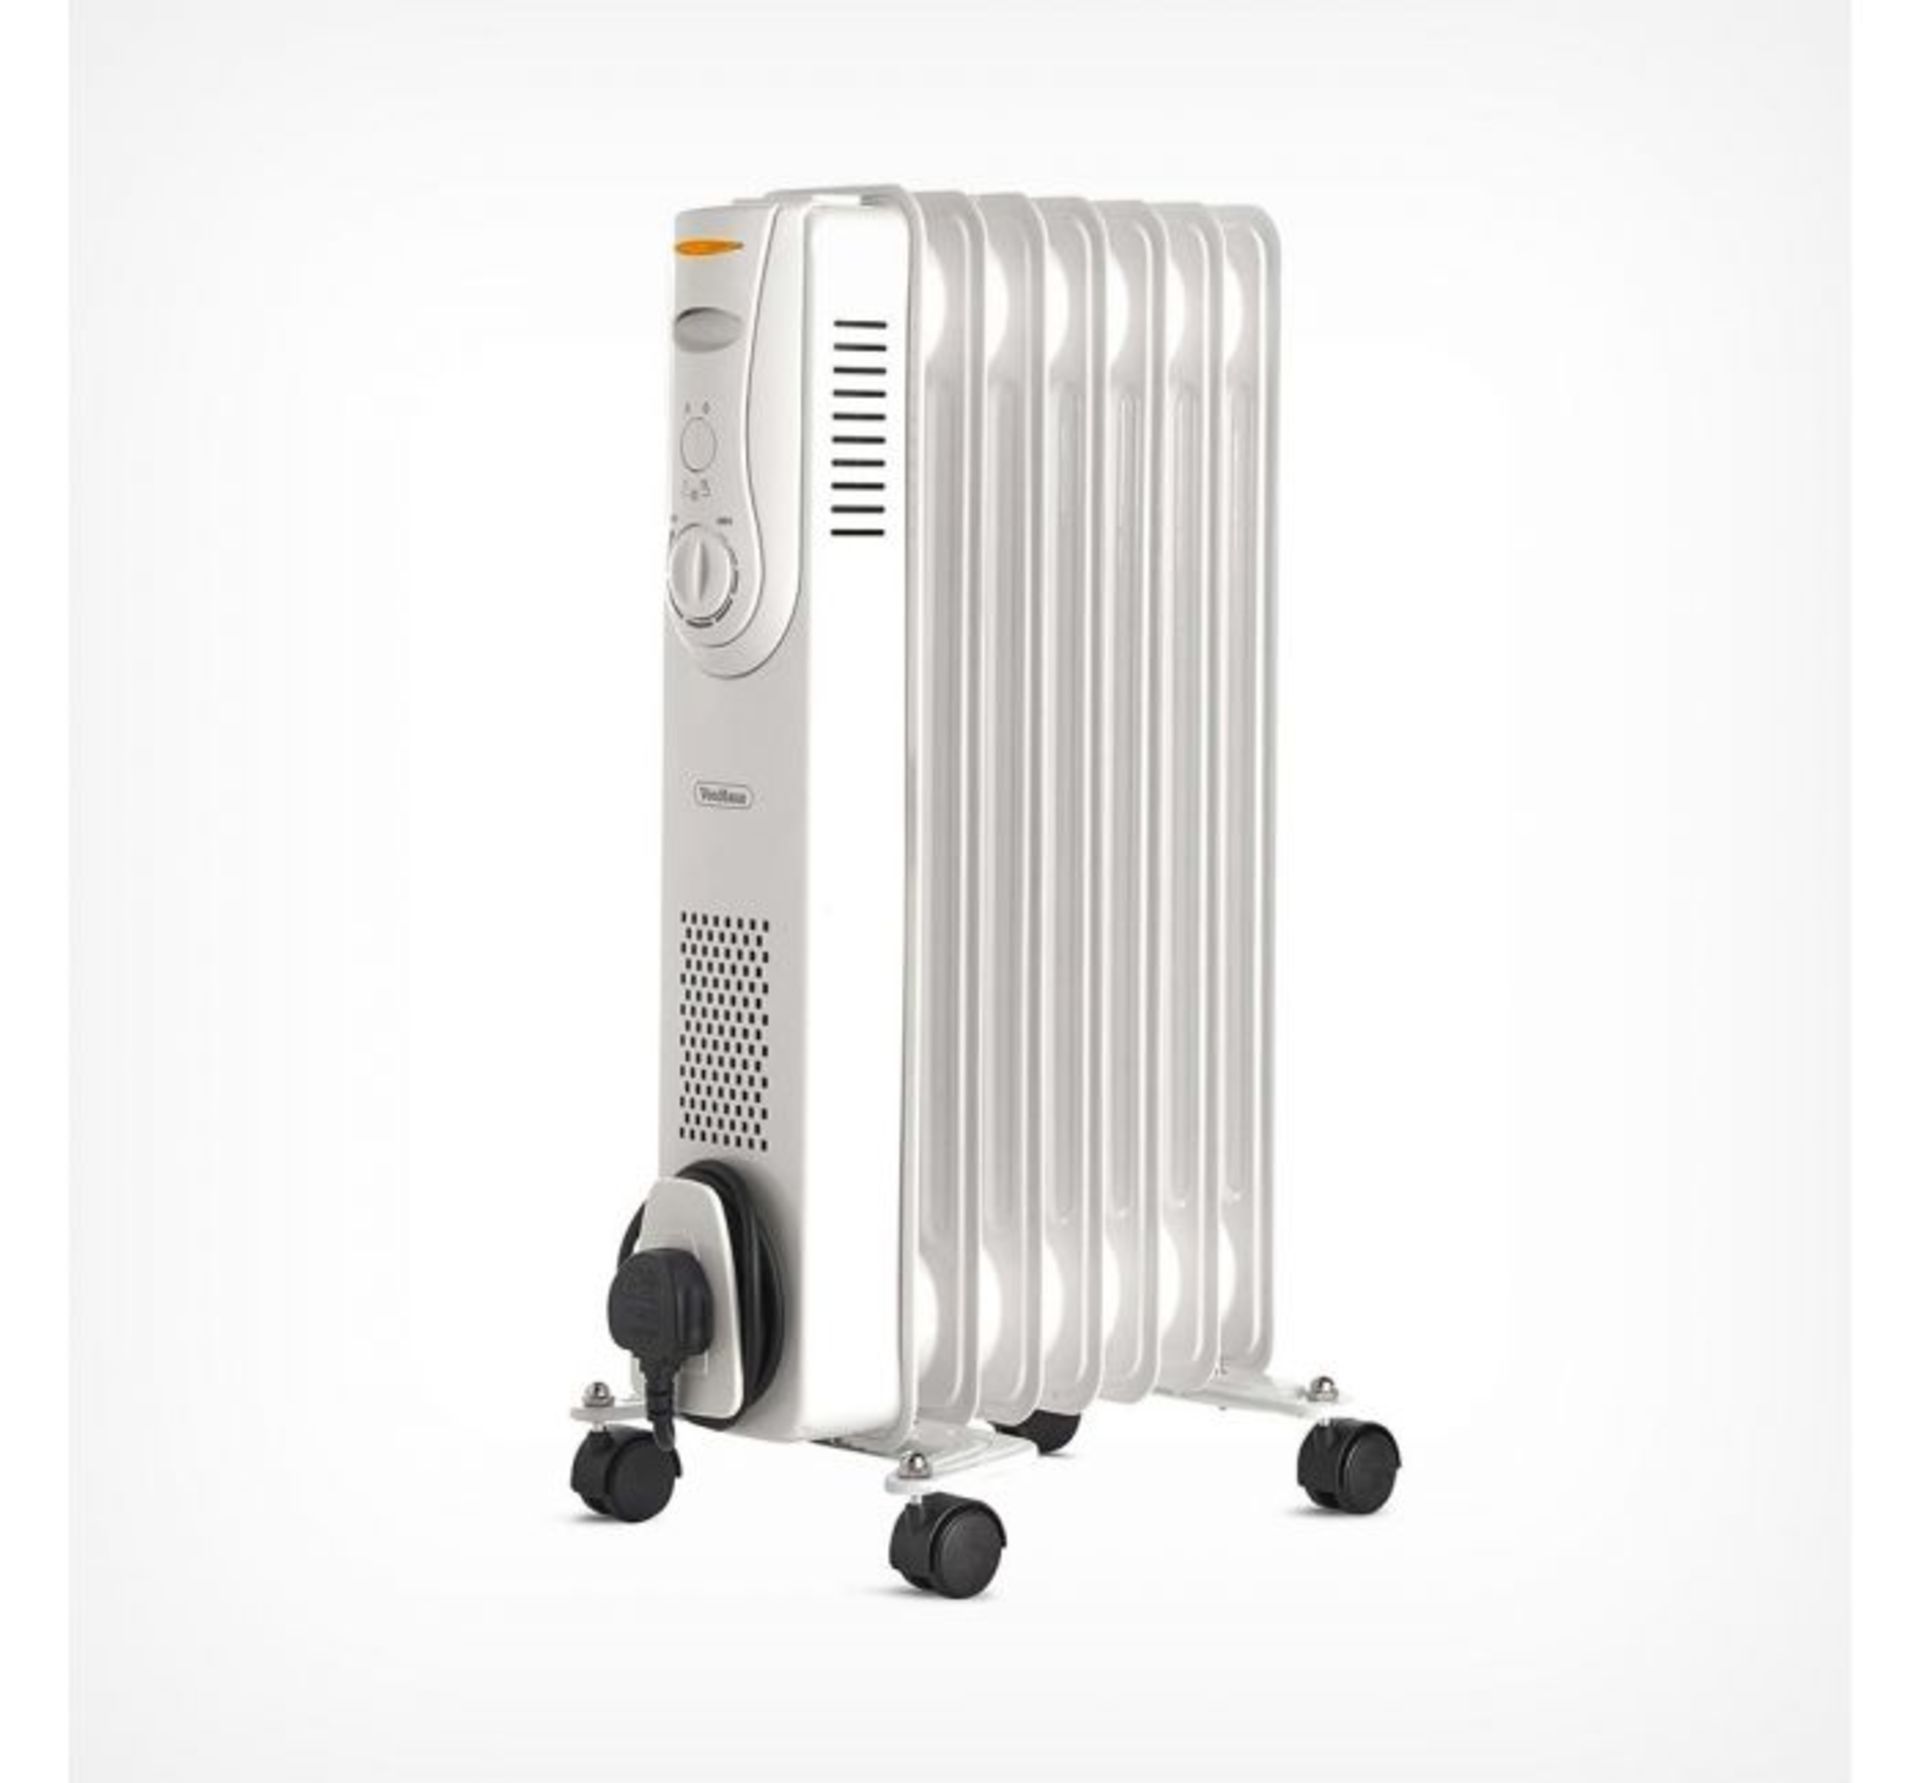 (K32) 7 Fin 1500W Oil Filled Radiator - White Equipped with 3 heat settings (600W/900W/1500W) ... - Image 2 of 3